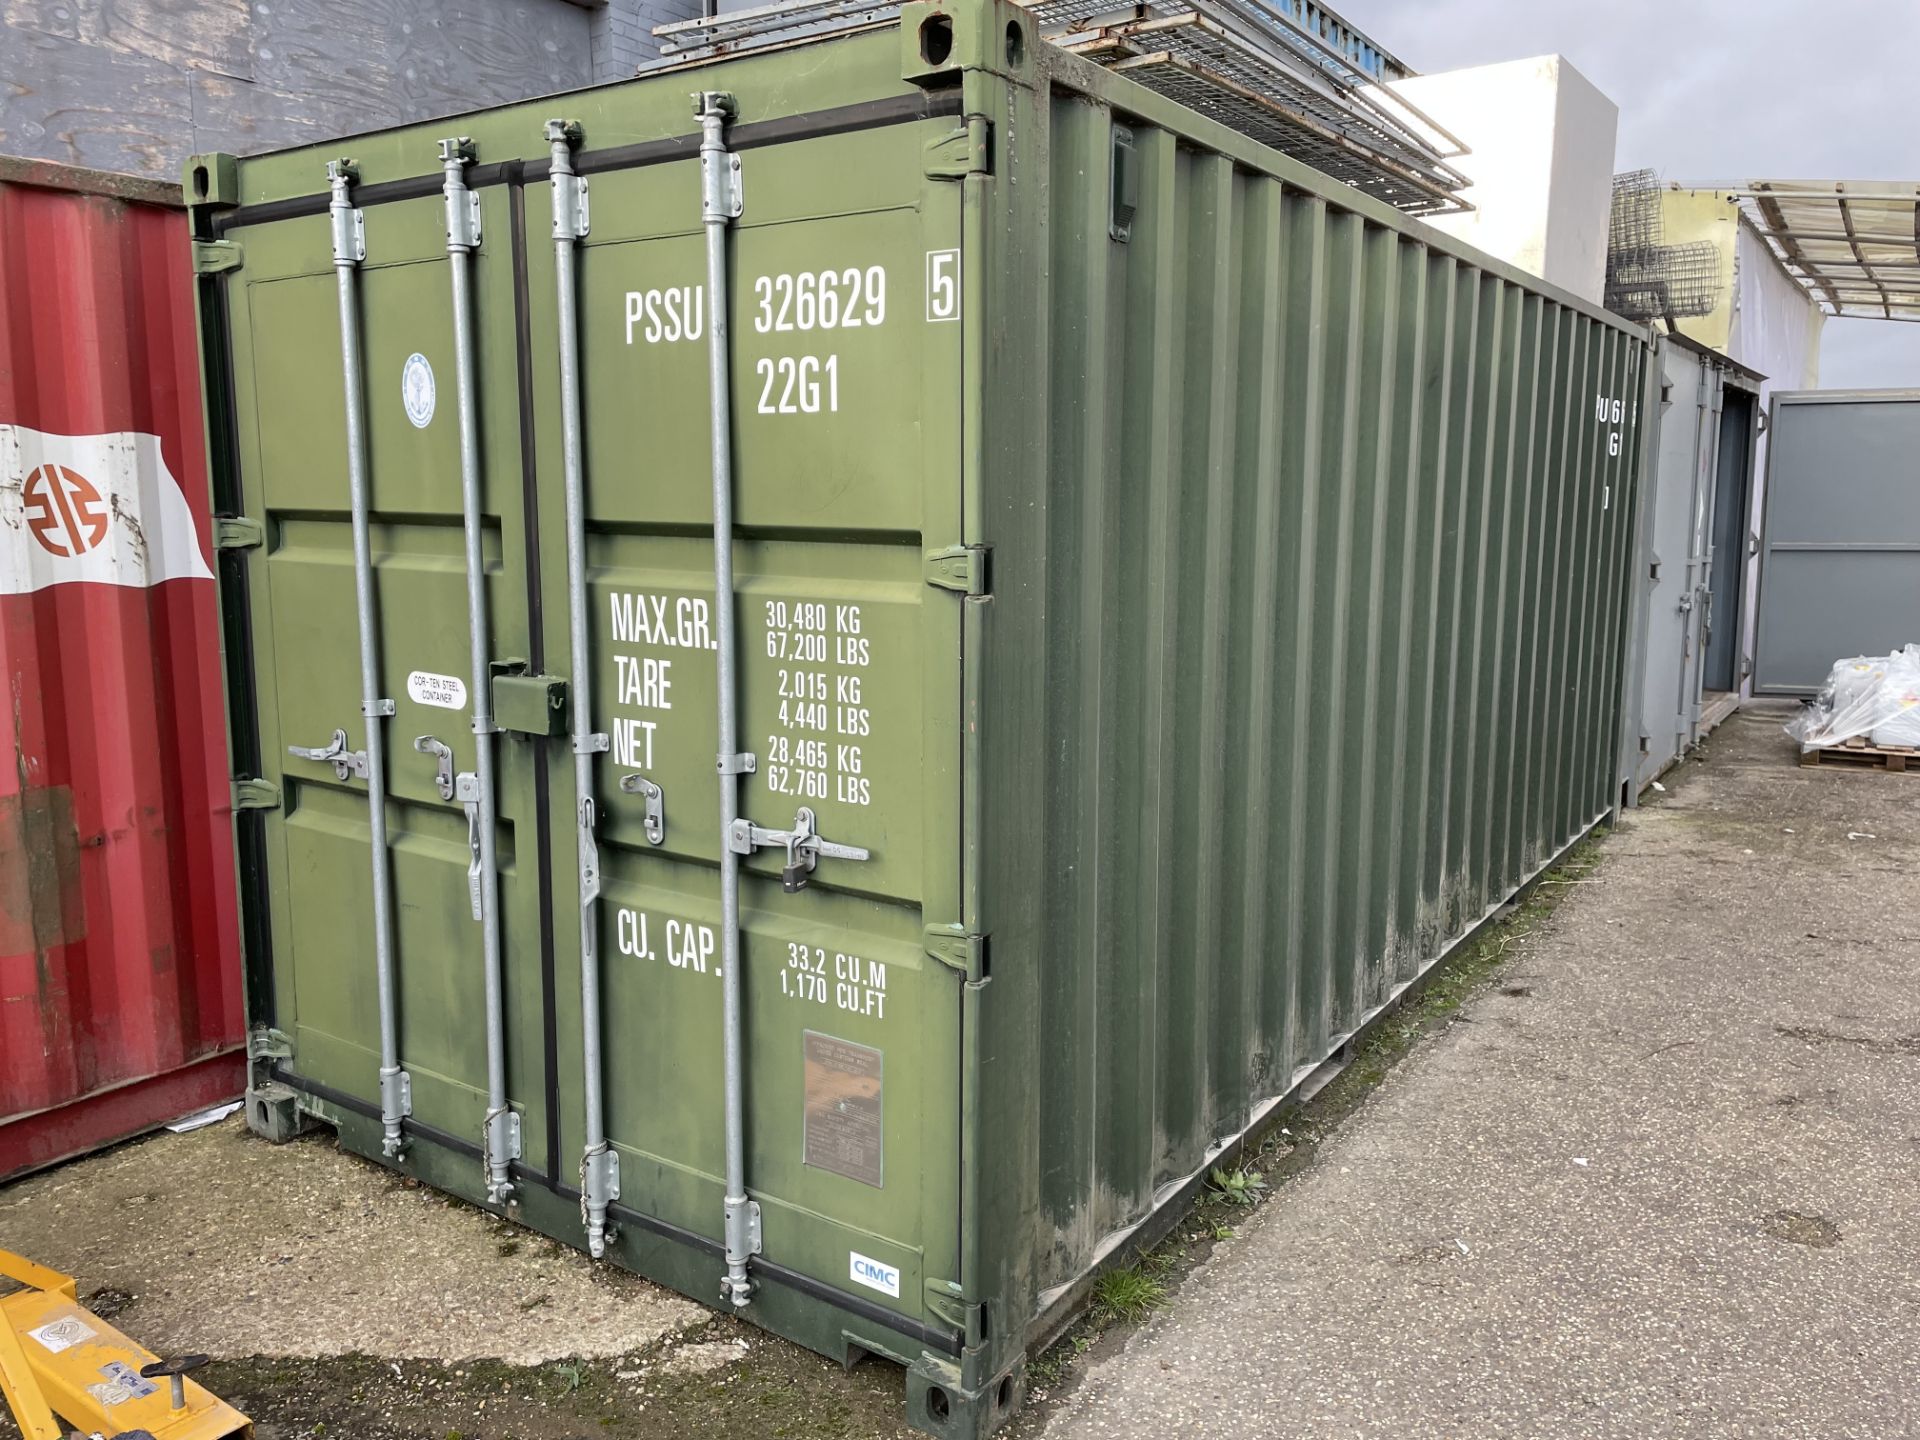 2013 CIMC Type CB22-0803 20' Shipping Container S/No. PSSU3266295 (Contents Excluded)